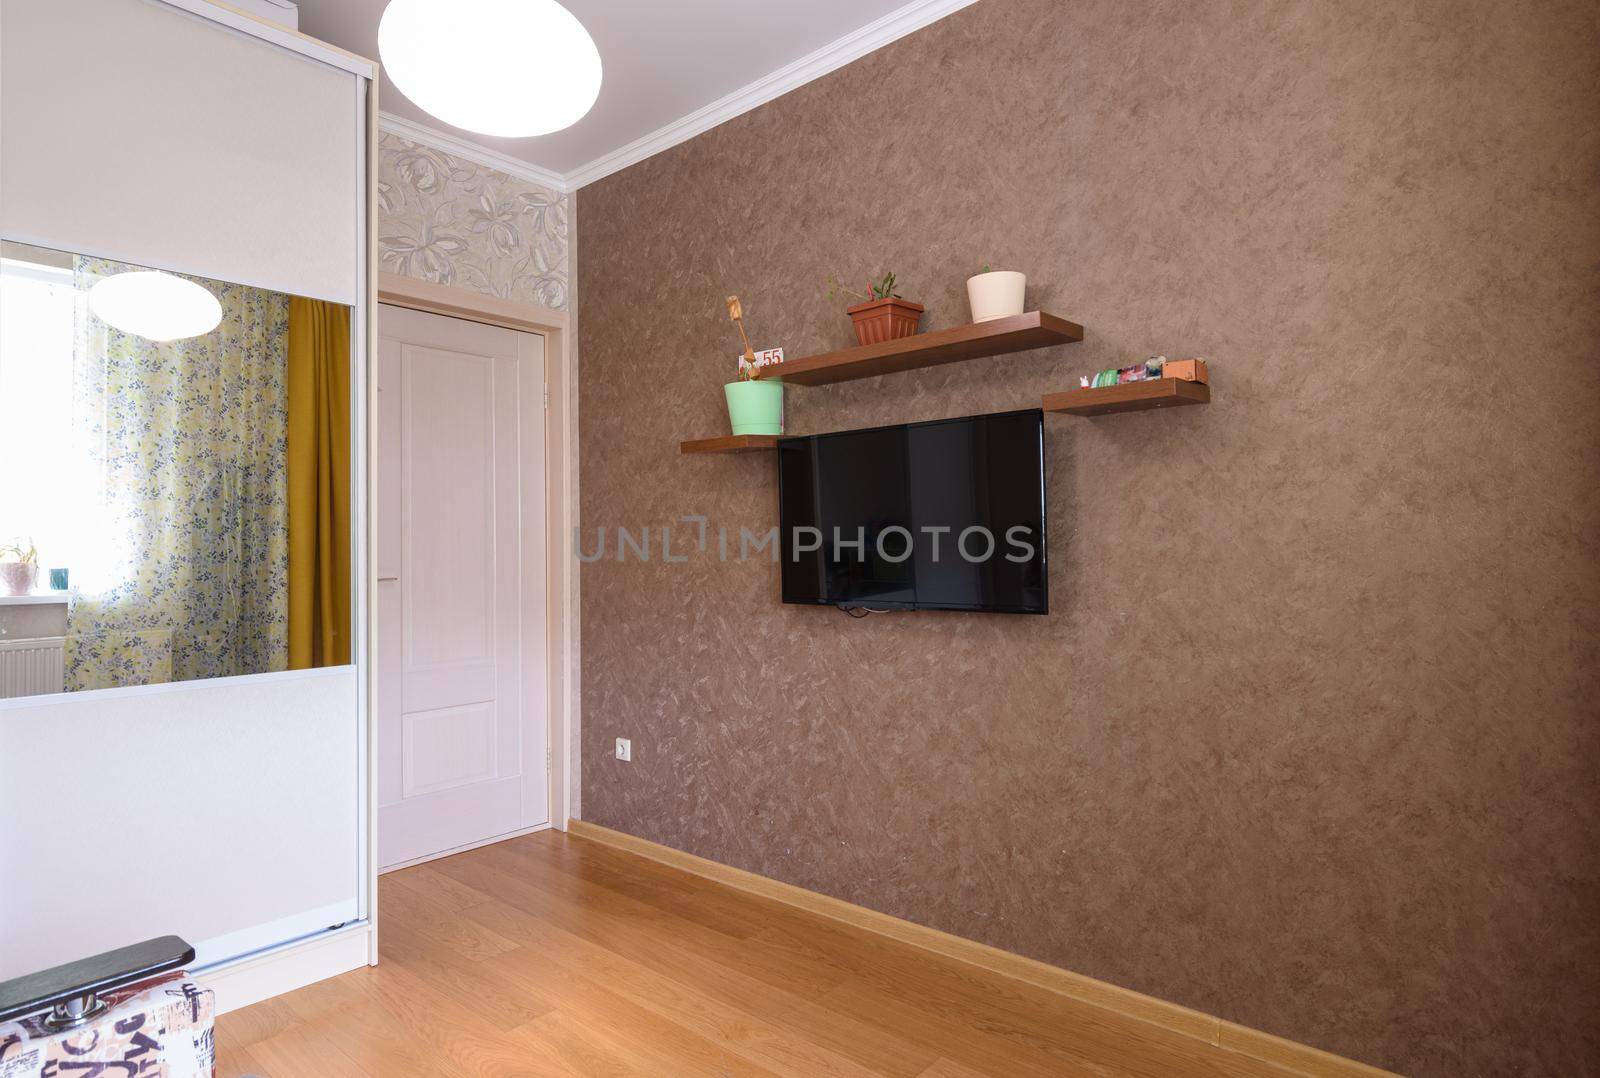 The interior of a small room, a view of the wardrobe, an entrance door and a wall with a TV and shelves